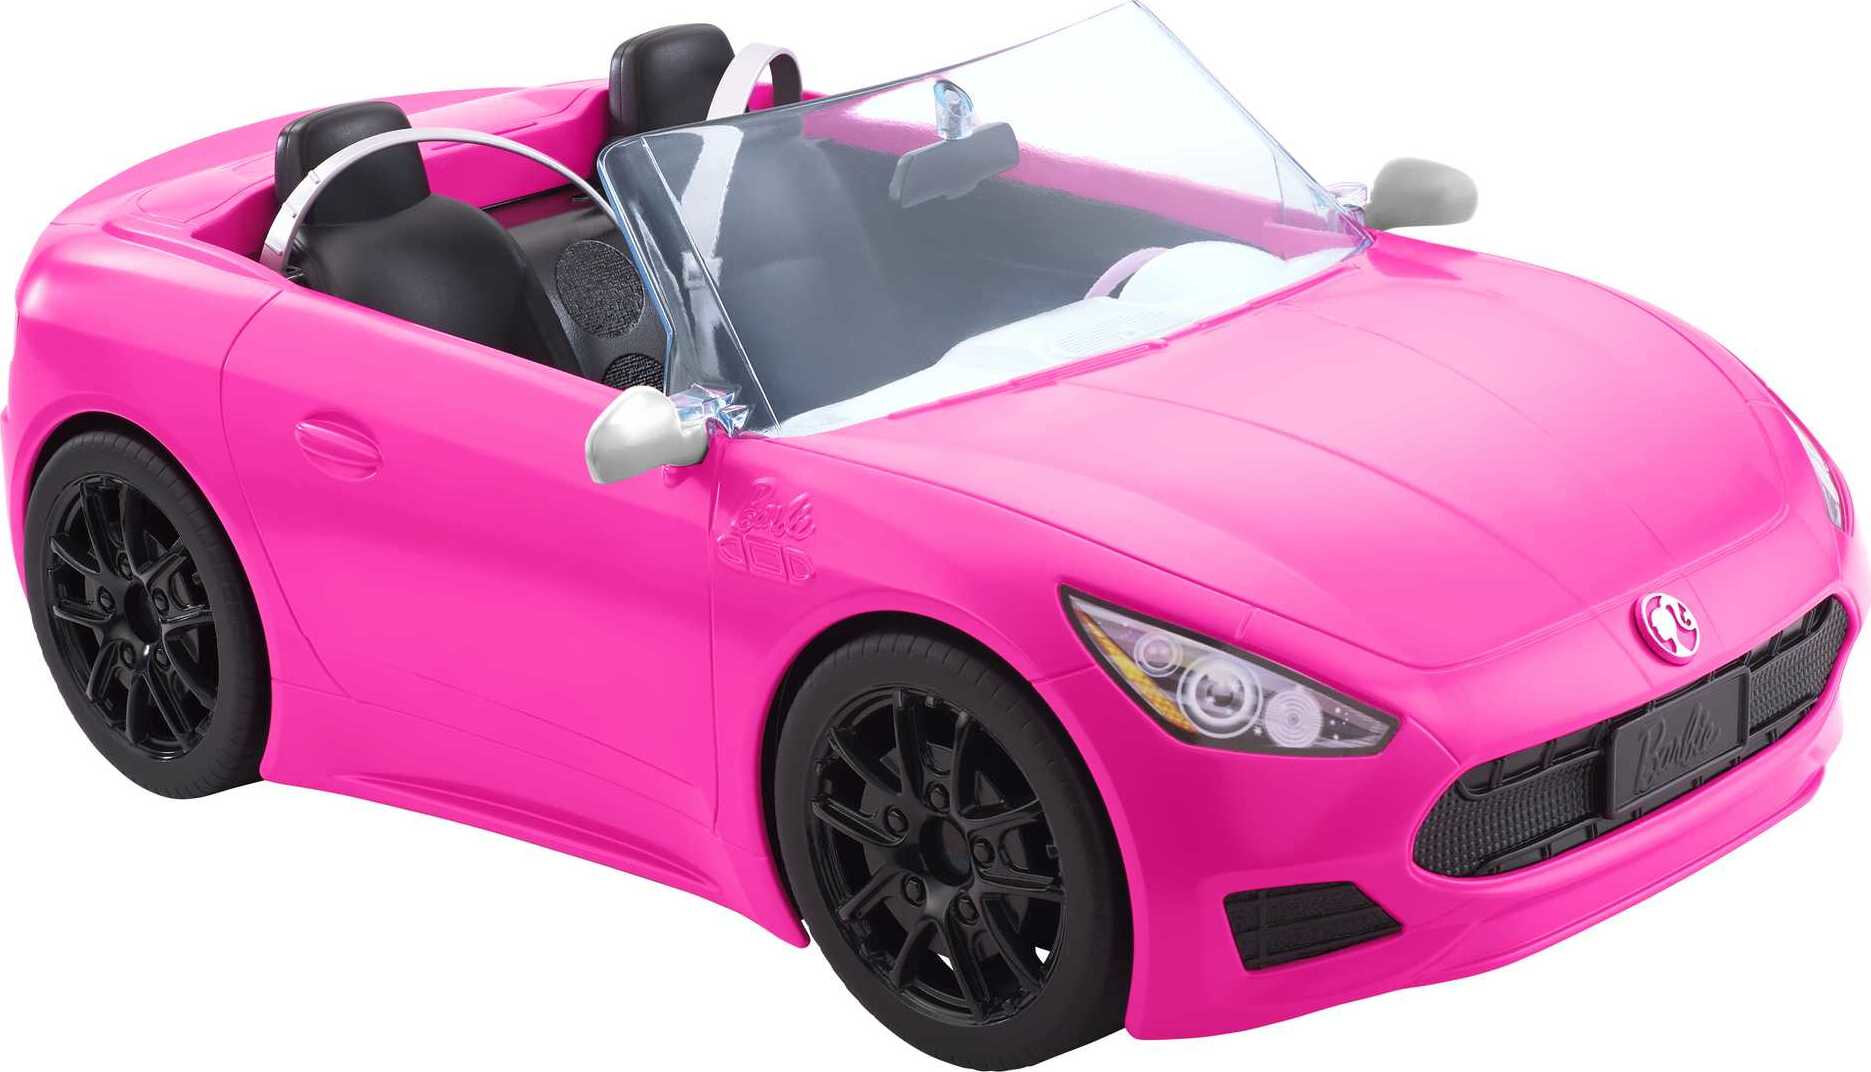 Barbie Convertible Toy Car, Bright Pink with Seatbelts and Rolling Wheels (Seats 2 Dolls), Toy for 3 Years and Up - image 1 of 6